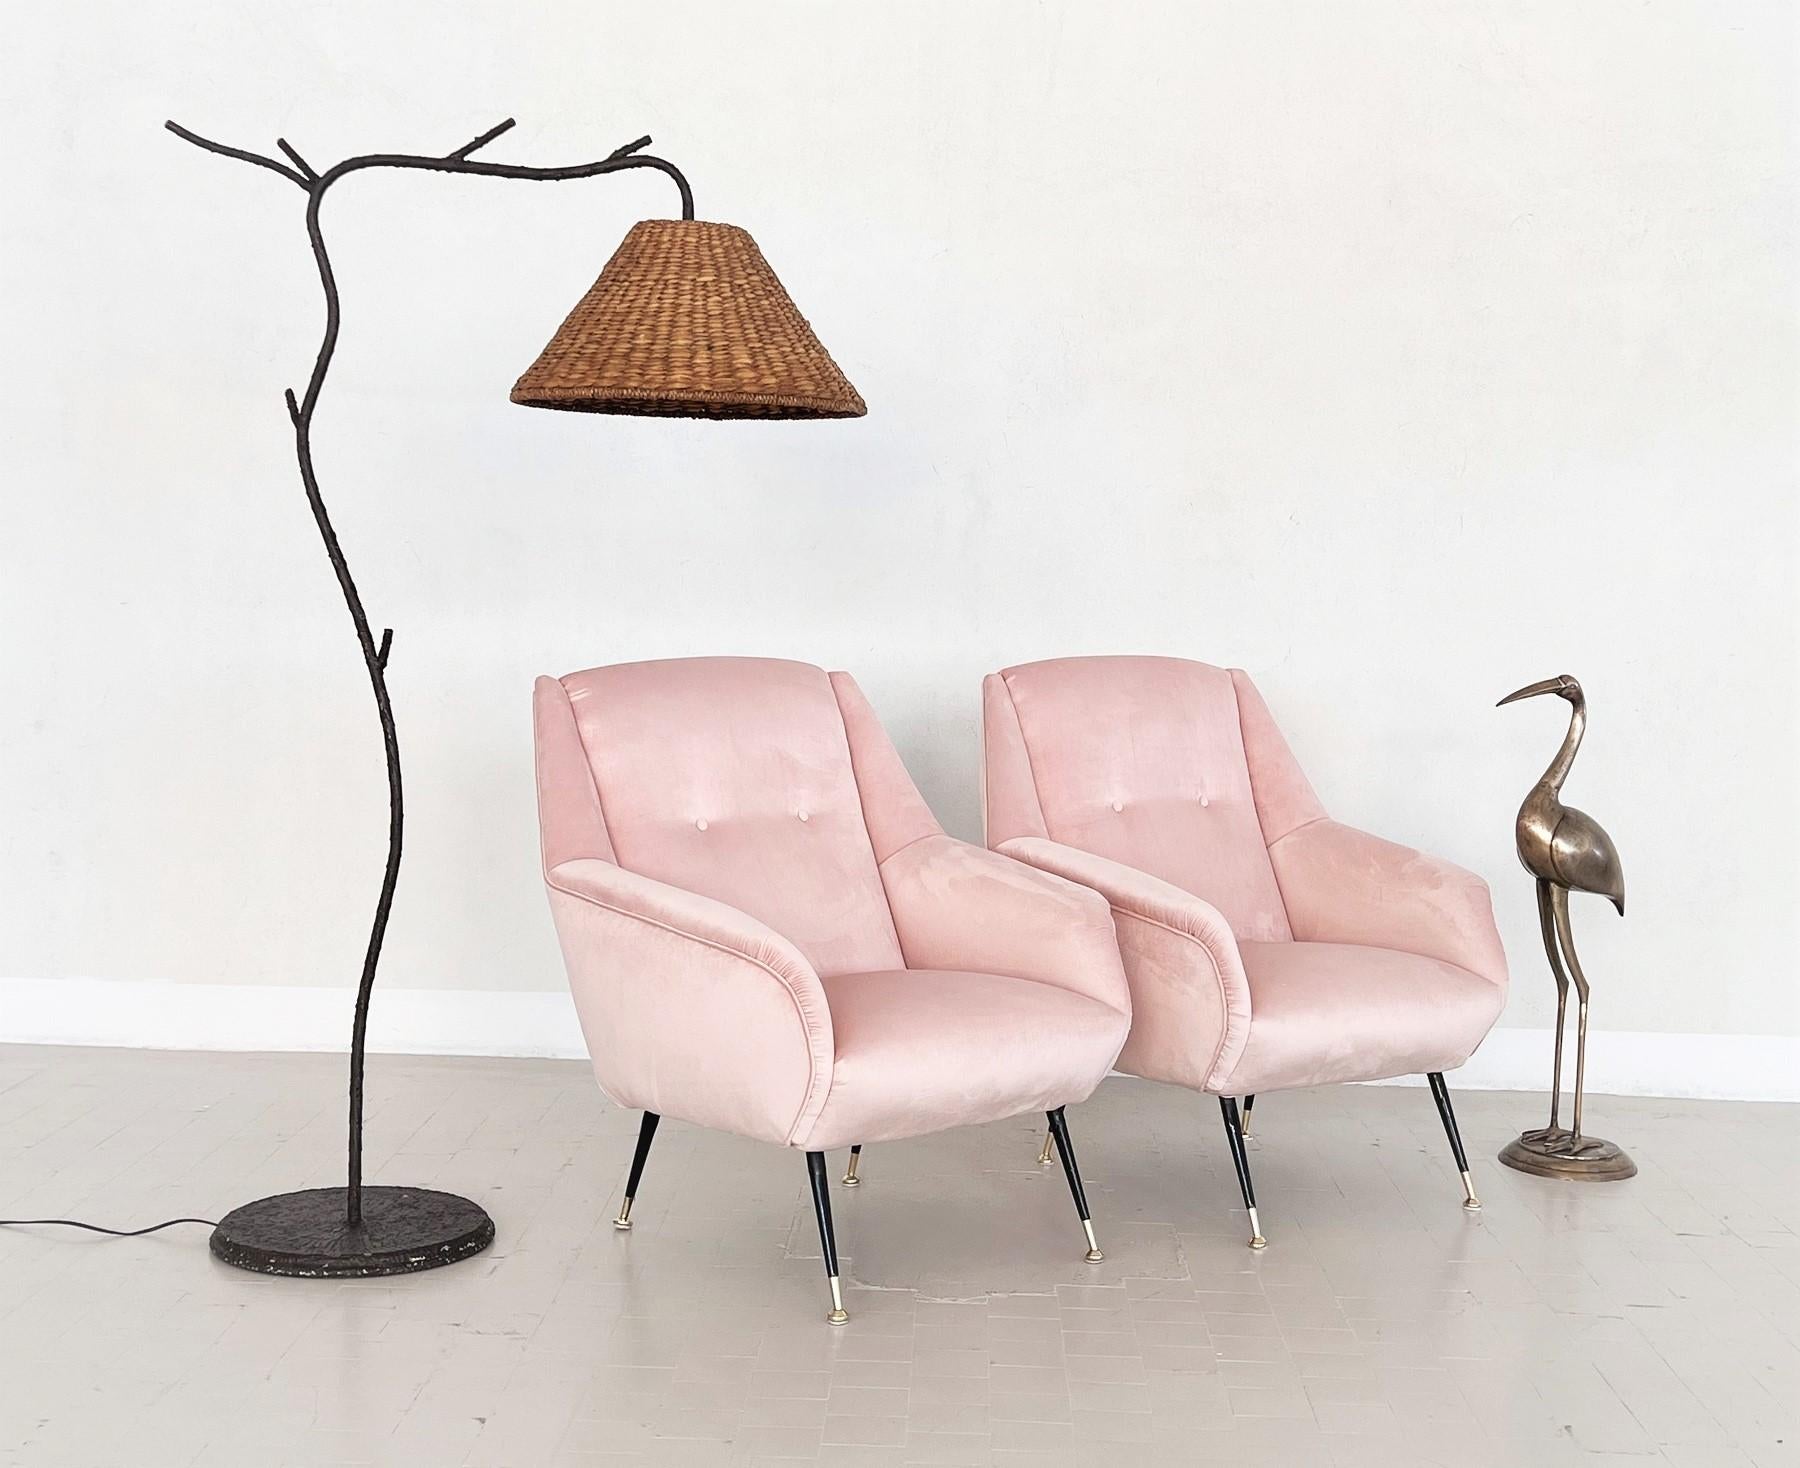 Italian Midcentury Armchairs in Soft Pink Velvet and Brass Tips, 1950s For Sale 9